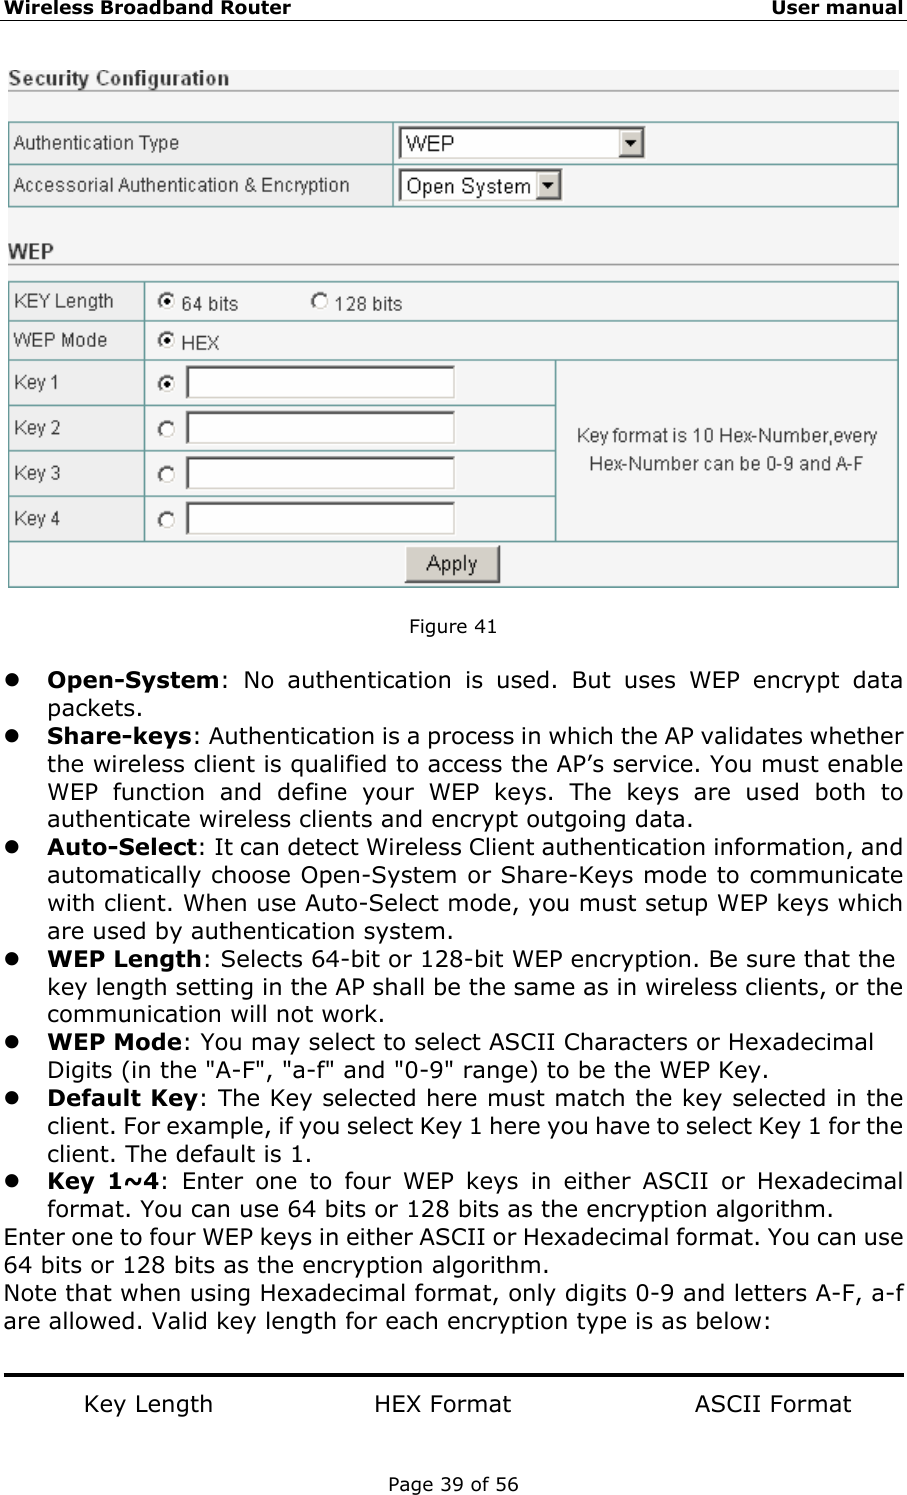 Wireless Broadband Router                                                   User manual Page 39 of 56   Figure 41  z Open-System: No authentication is used. But uses WEP encrypt data packets. z Share-keys: Authentication is a process in which the AP validates whether the wireless client is qualified to access the AP’s service. You must enable WEP function and define your WEP keys. The keys are used both to authenticate wireless clients and encrypt outgoing data. z Auto-Select: It can detect Wireless Client authentication information, and automatically choose Open-System or Share-Keys mode to communicate with client. When use Auto-Select mode, you must setup WEP keys which are used by authentication system. z WEP Length: Selects 64-bit or 128-bit WEP encryption. Be sure that the key length setting in the AP shall be the same as in wireless clients, or the communication will not work. z WEP Mode: You may select to select ASCII Characters or Hexadecimal Digits (in the &quot;A-F&quot;, &quot;a-f&quot; and &quot;0-9&quot; range) to be the WEP Key. z Default Key: The Key selected here must match the key selected in the client. For example, if you select Key 1 here you have to select Key 1 for the client. The default is 1.   z Key 1~4: Enter one to four WEP keys in either ASCII or Hexadecimal format. You can use 64 bits or 128 bits as the encryption algorithm.   Enter one to four WEP keys in either ASCII or Hexadecimal format. You can use 64 bits or 128 bits as the encryption algorithm. Note that when using Hexadecimal format, only digits 0-9 and letters A-F, a-f are allowed. Valid key length for each encryption type is as below:   Key Length              HEX Format                ASCII Format 